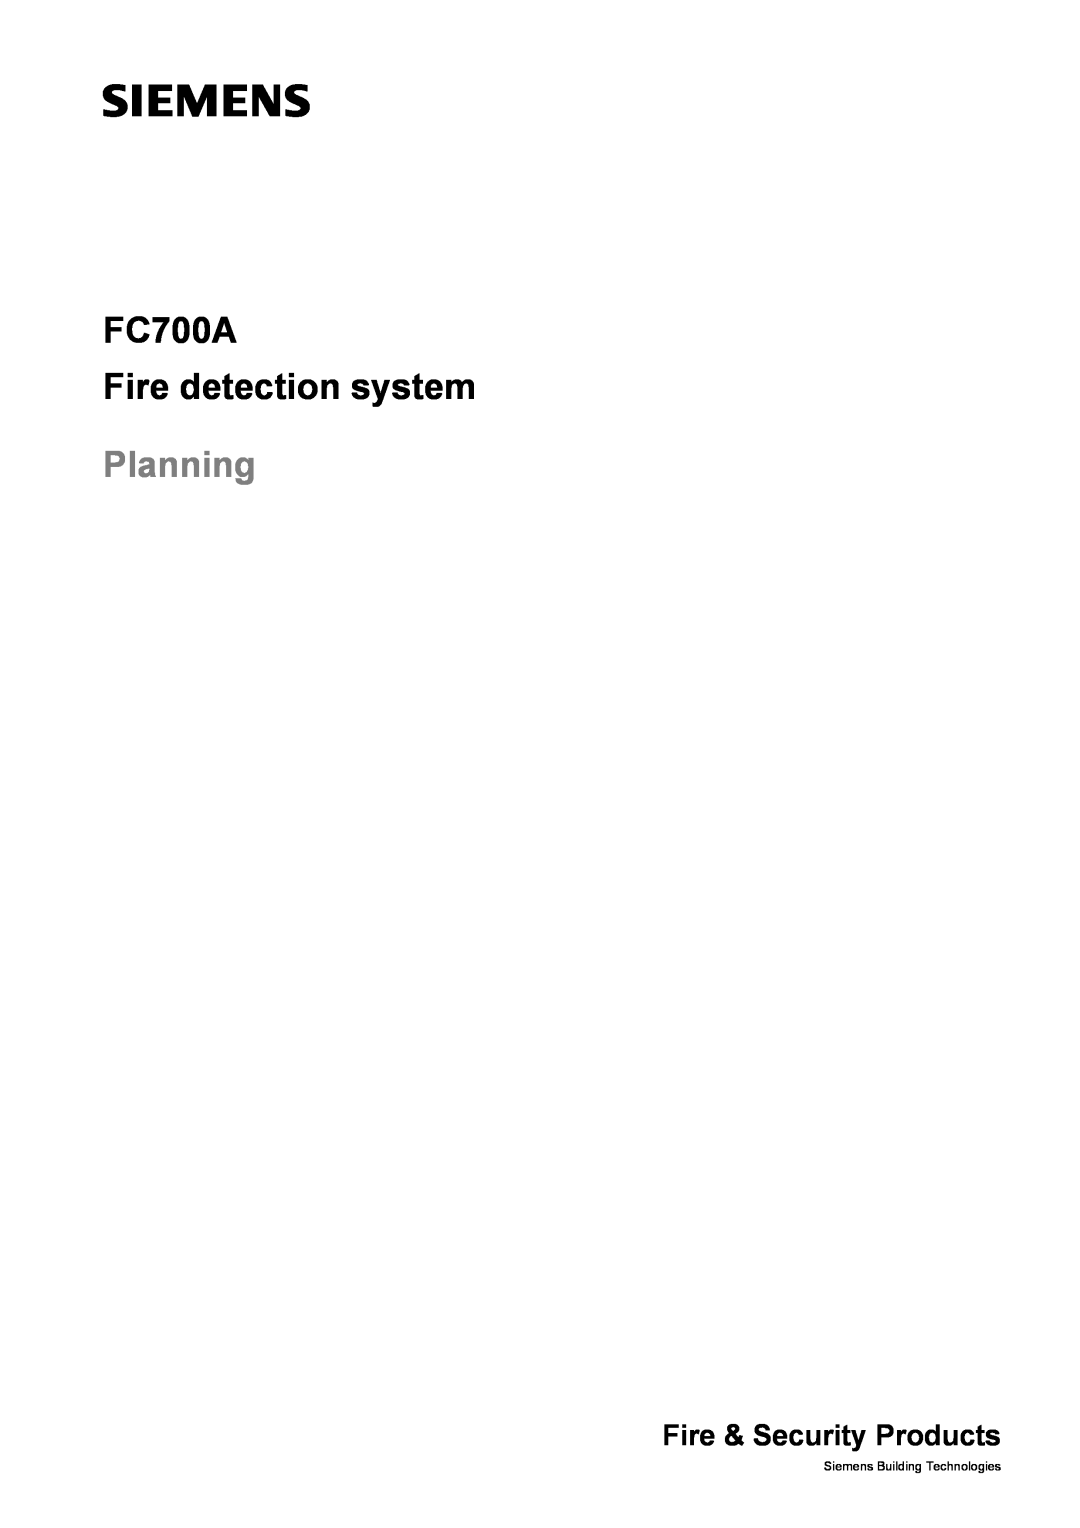 Siemens manual FC700A Fire detection system, Planning, Fire & Security Products, Siemens Building Technologies 